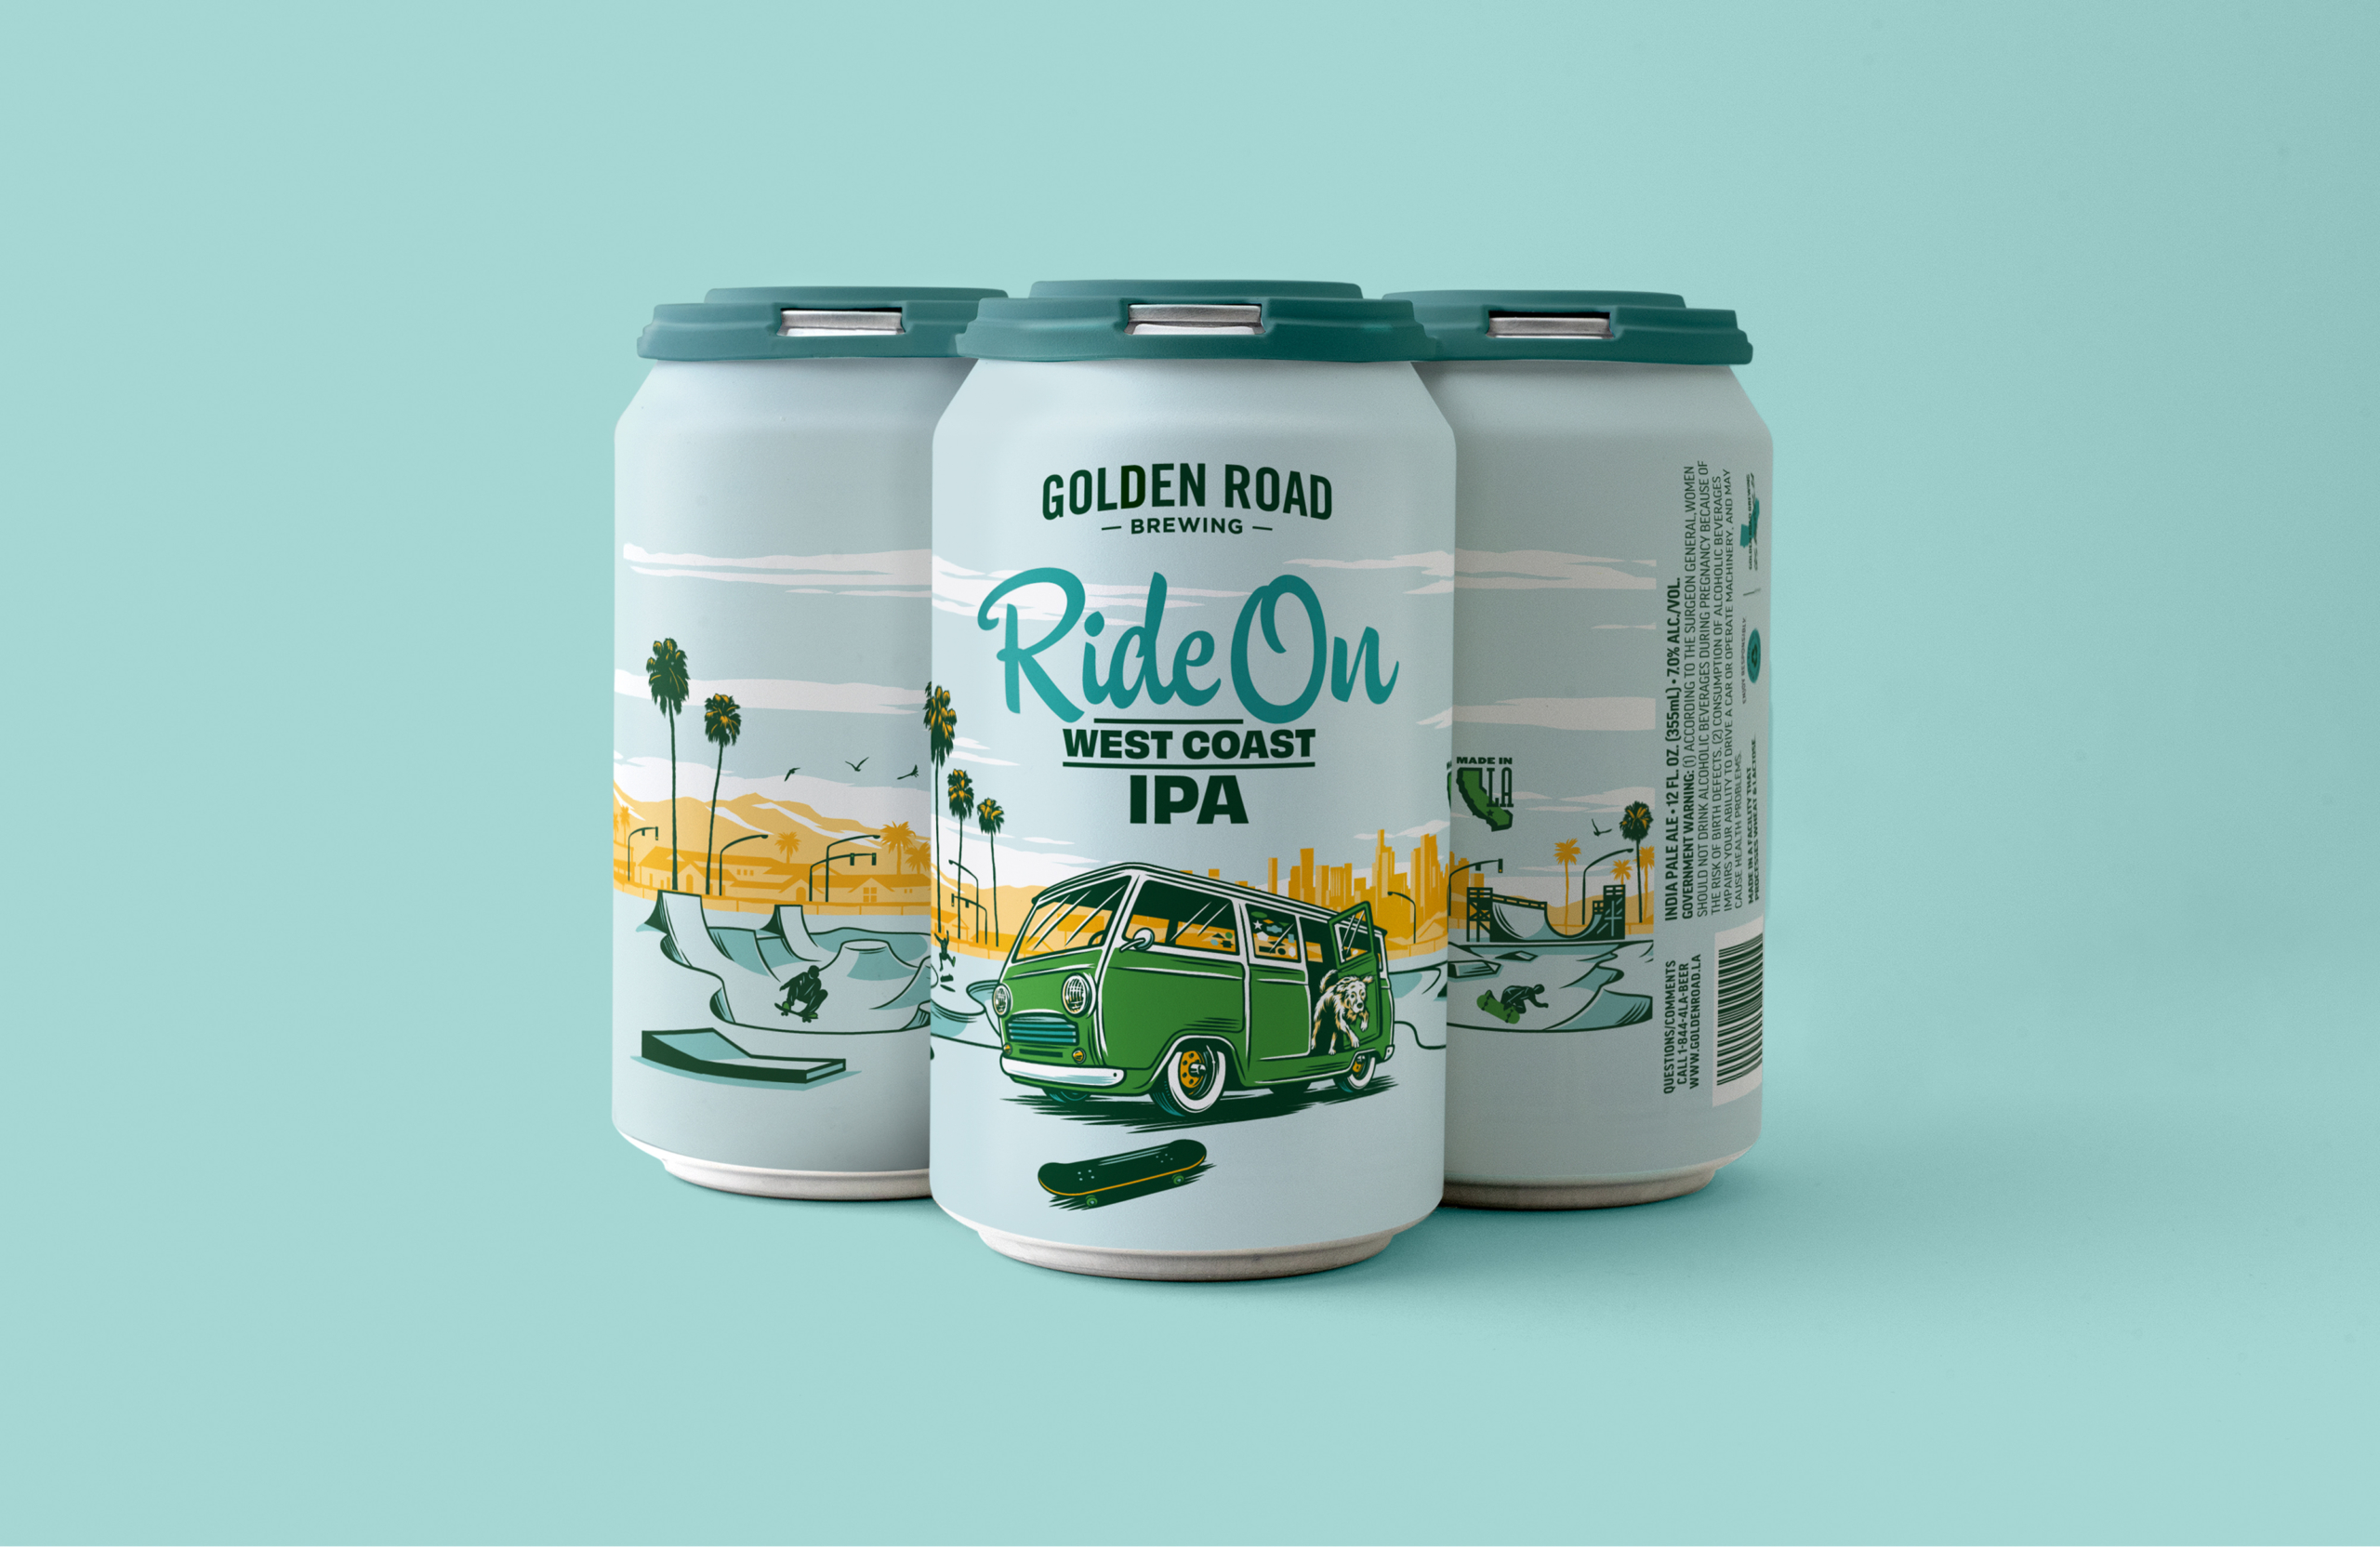 Three cans of Golden Road Ride On West Coast IPA against a light aqua background. The can is light blue with an illustration of a vintage green van parked in front of a skate park with palm trees and a city skyline in the background. A dog leaps from the van toward a dark green skateboard. The beer name 